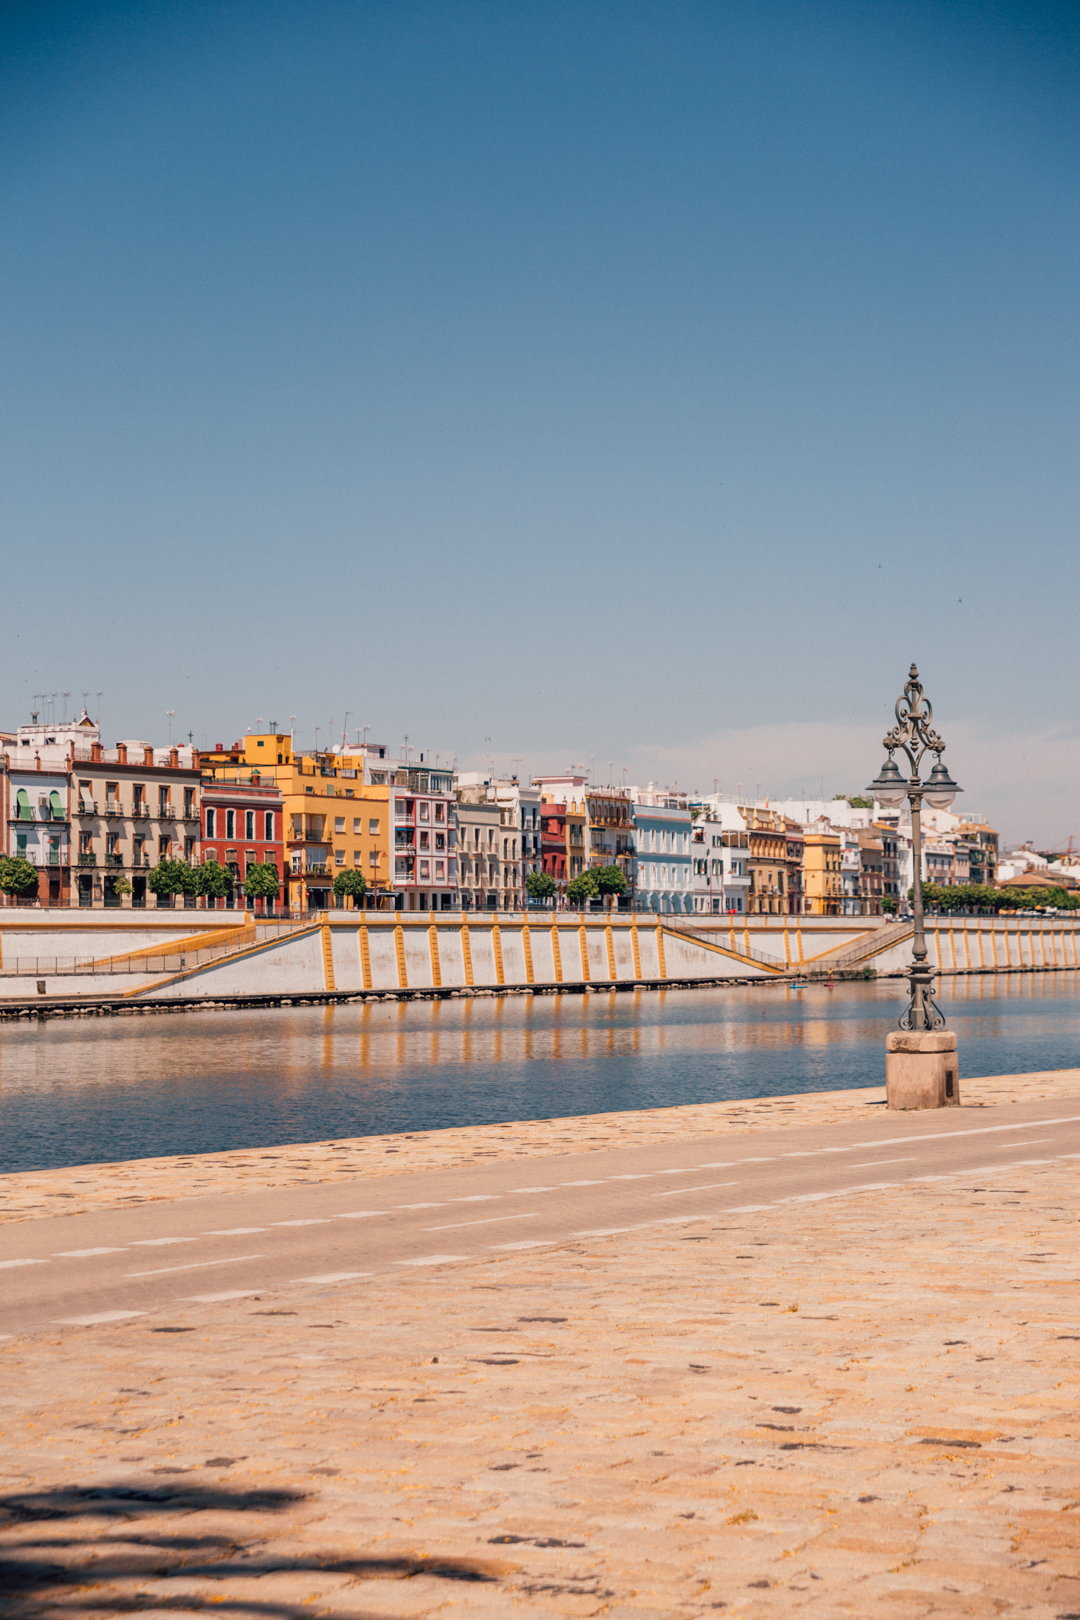 Is Seville worth visiting?